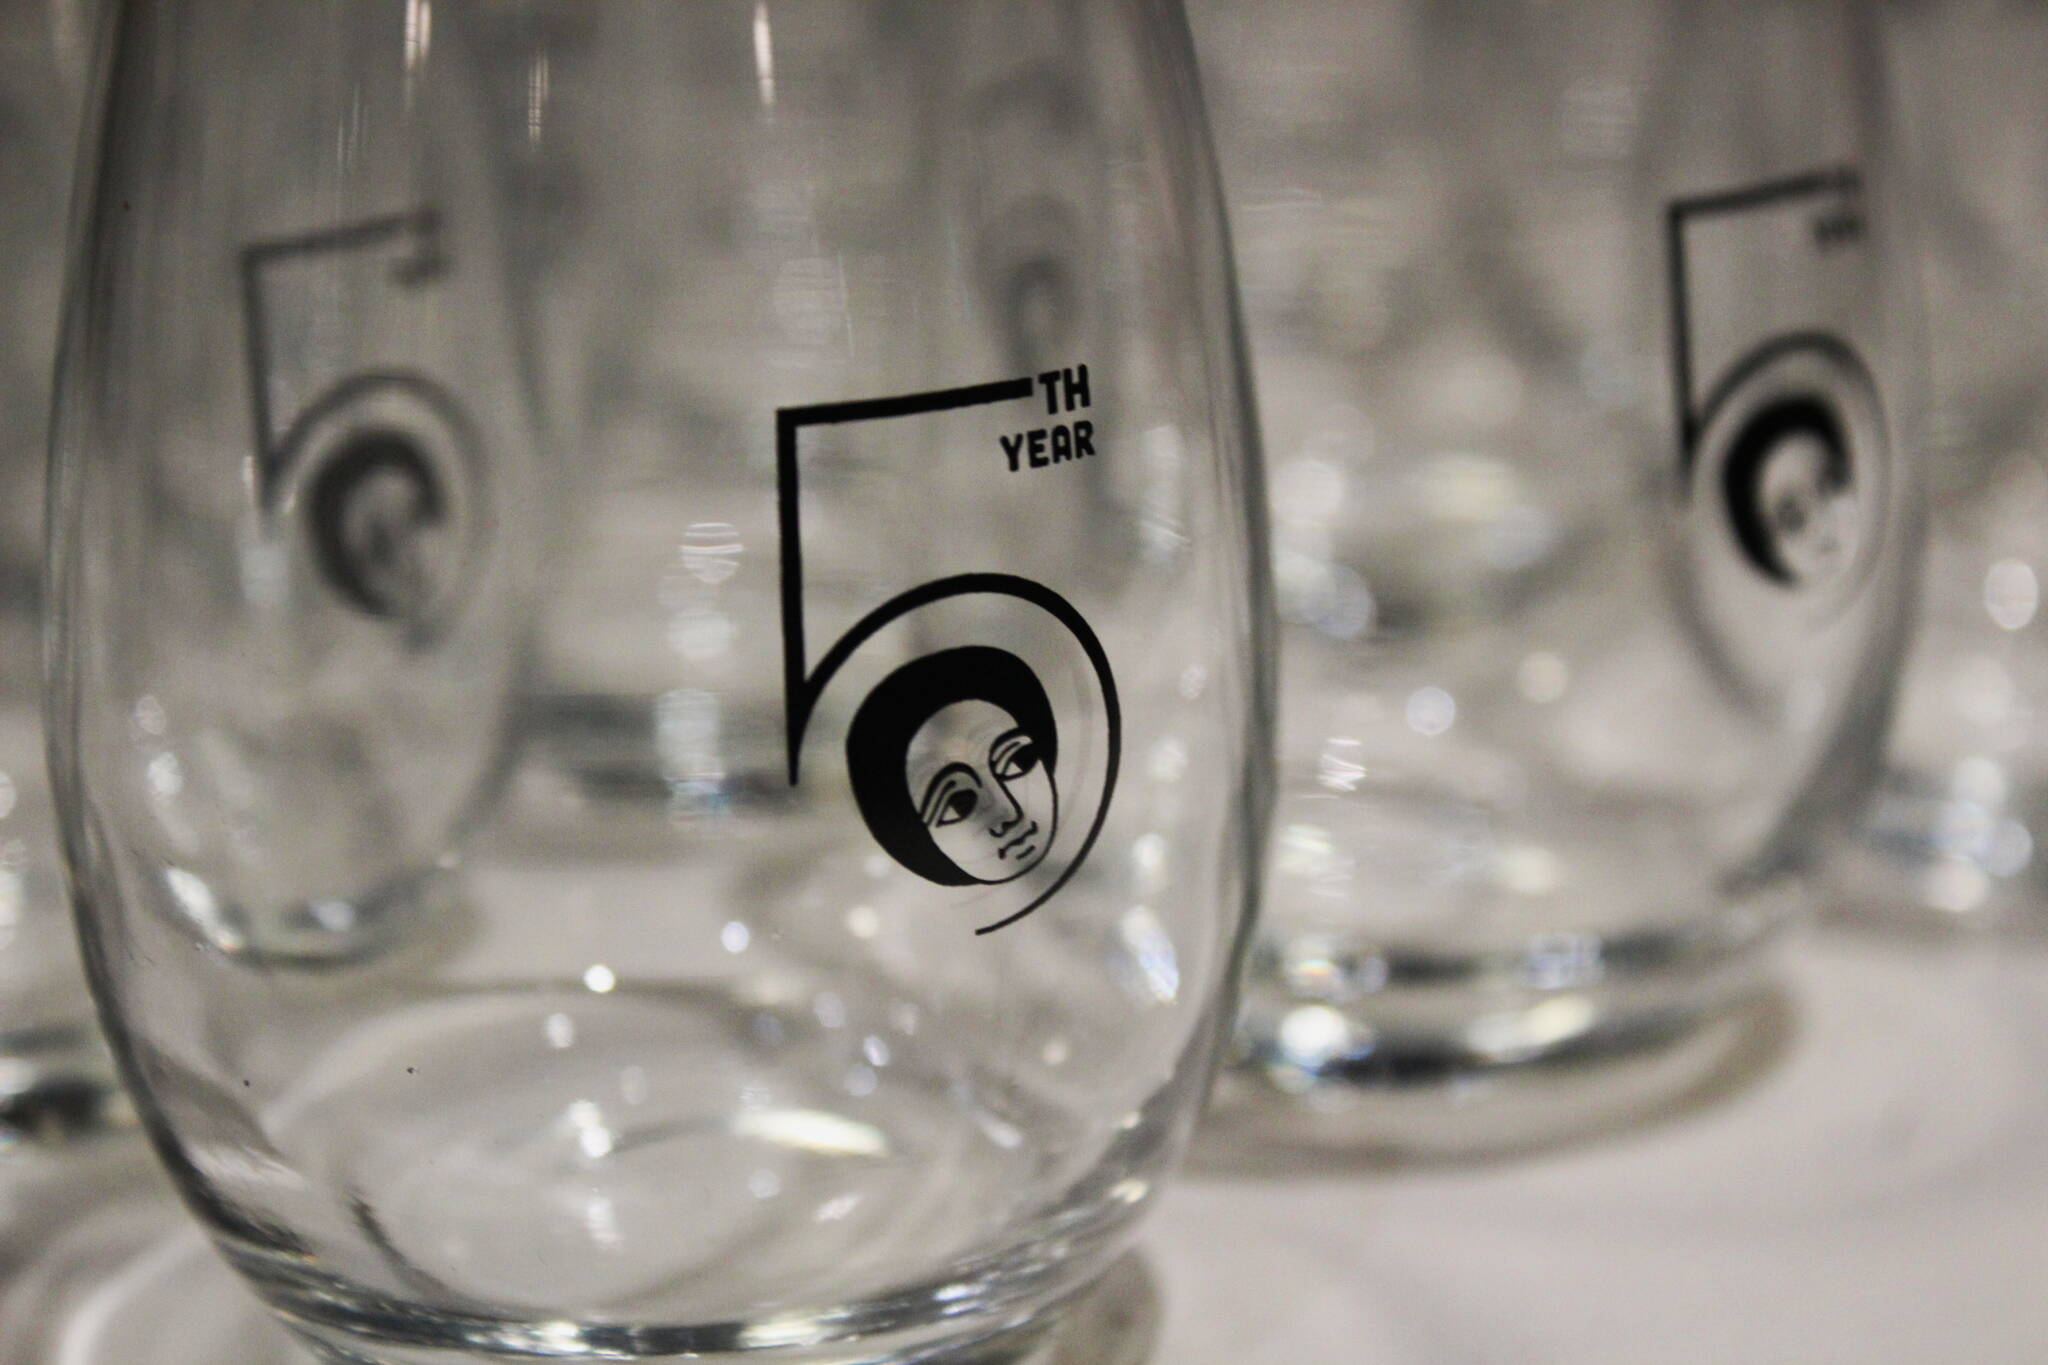 Special packages included celebratory glasses. (Photo by Bailey Jo Josie/Sound Publishing)